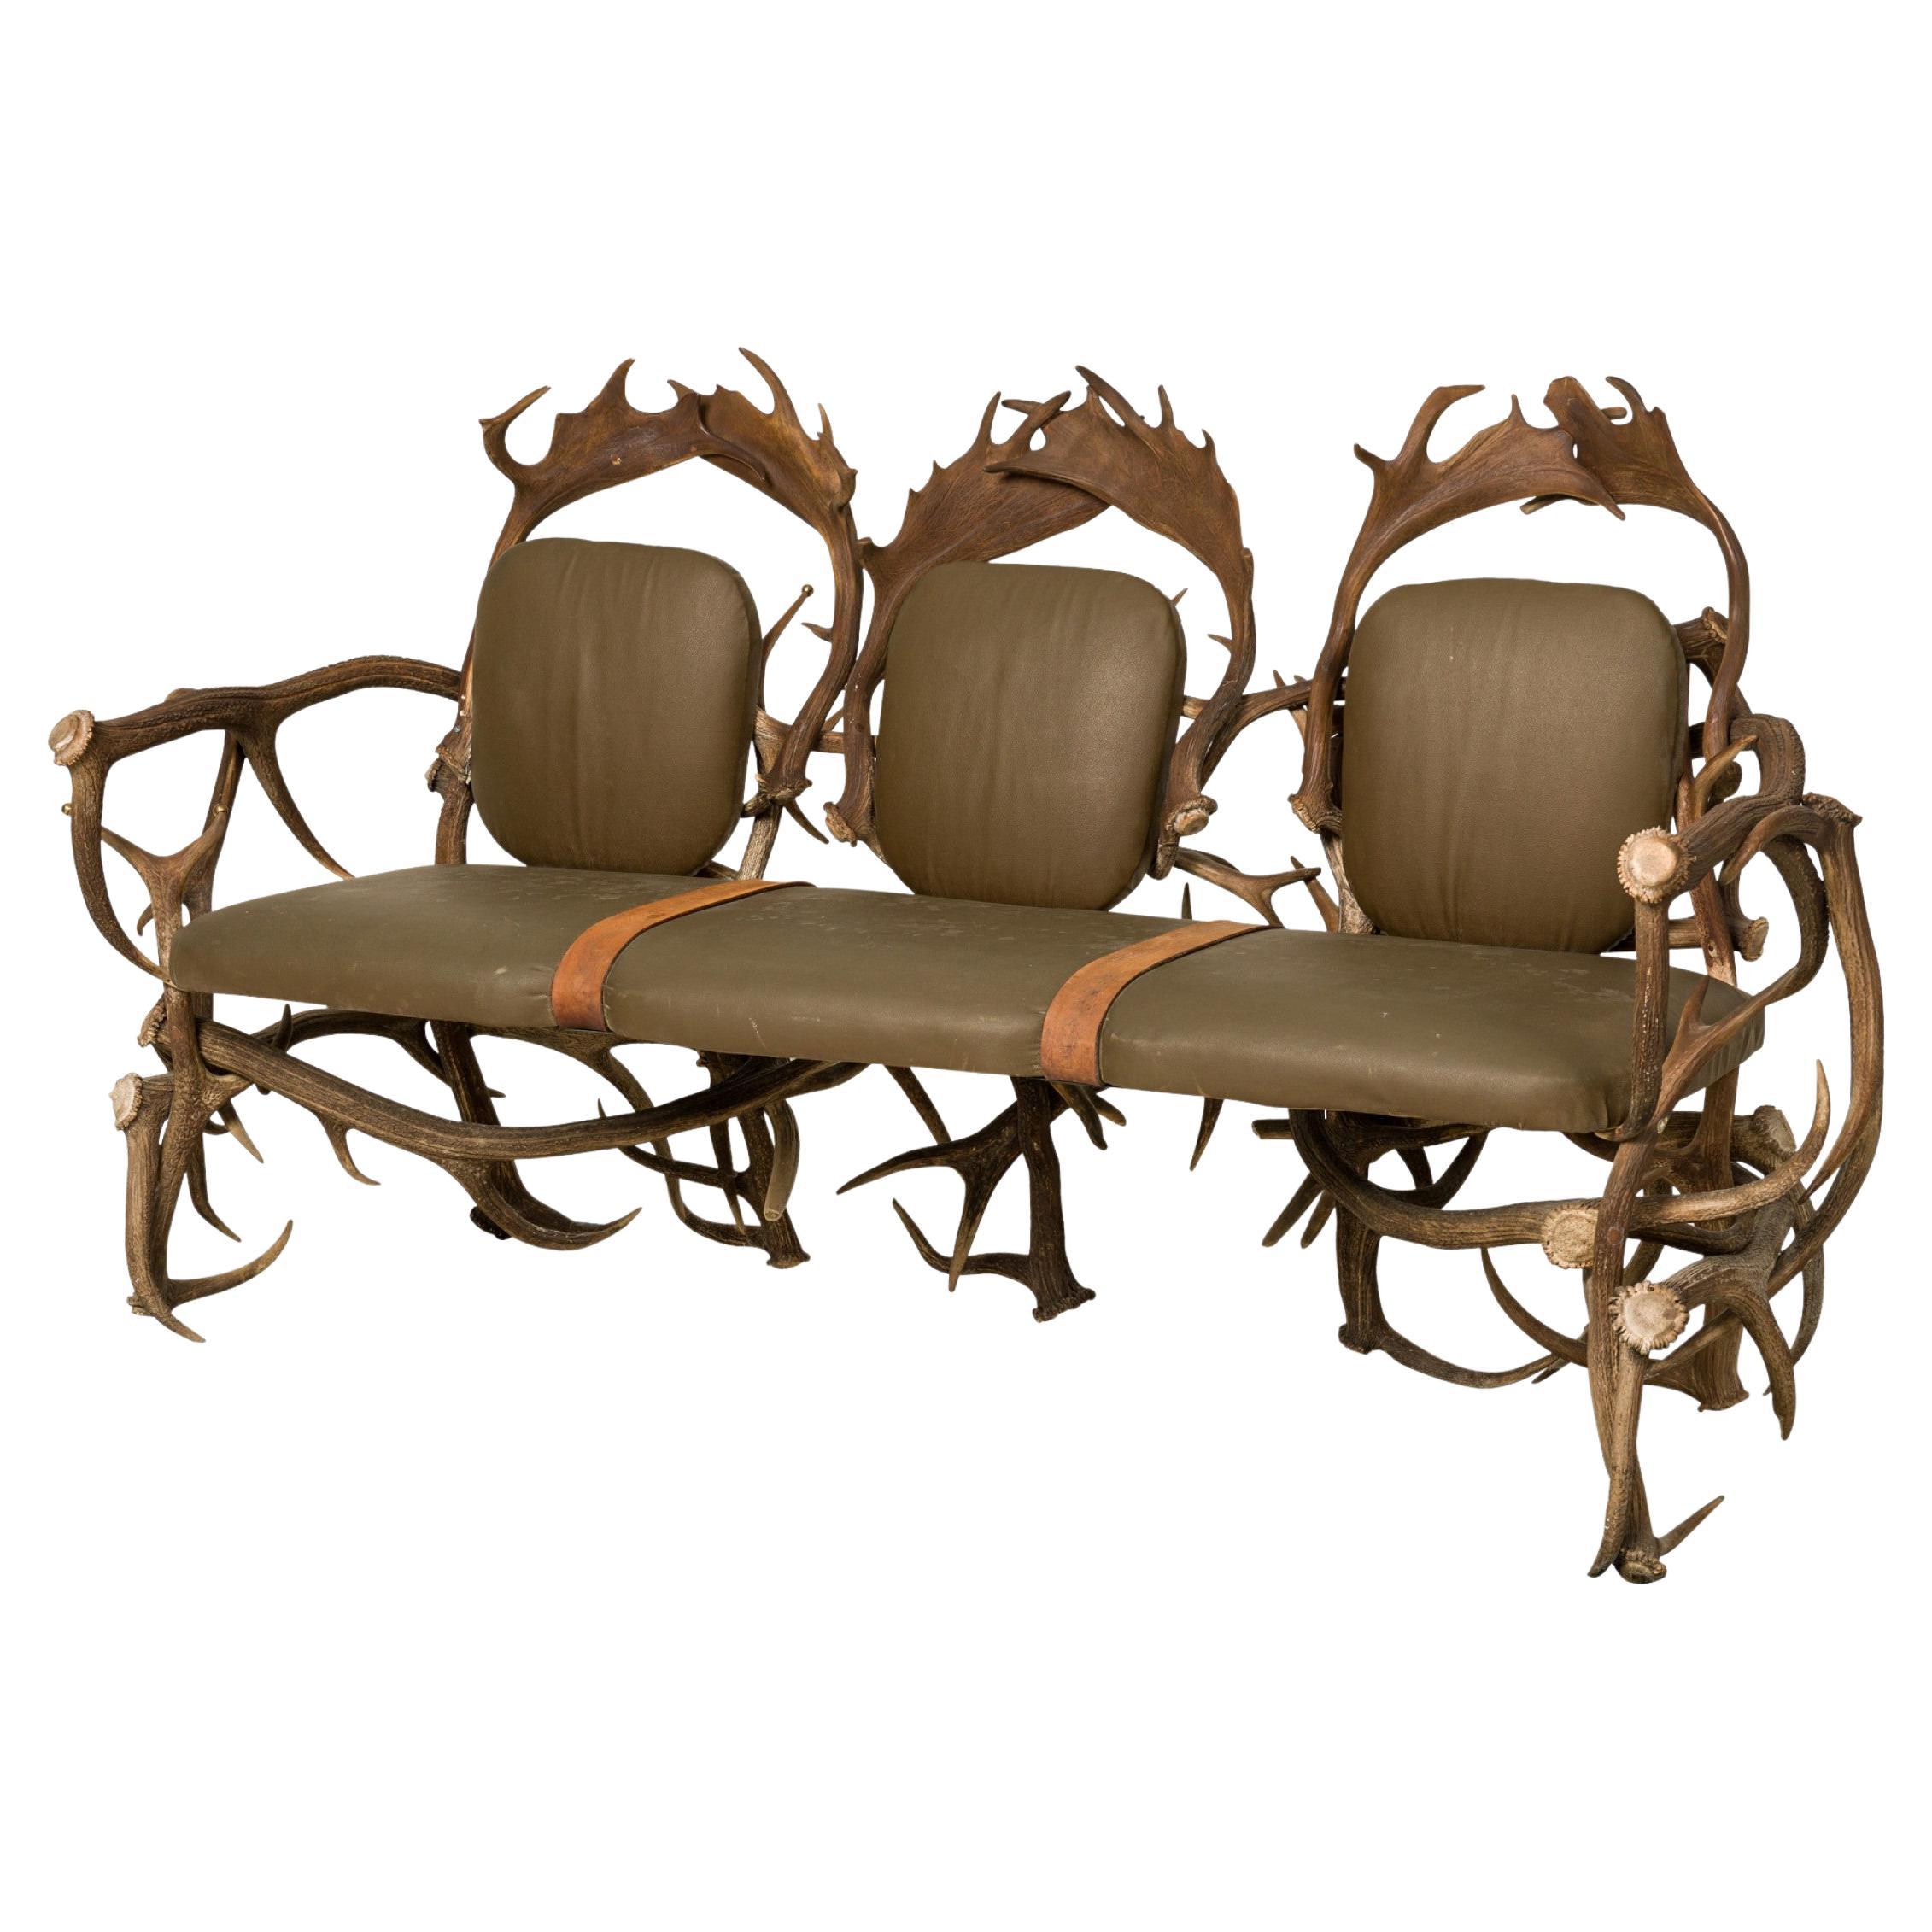 Rustic Continental Style Green Leather and Faux Antler Three-Seat Settee For Sale